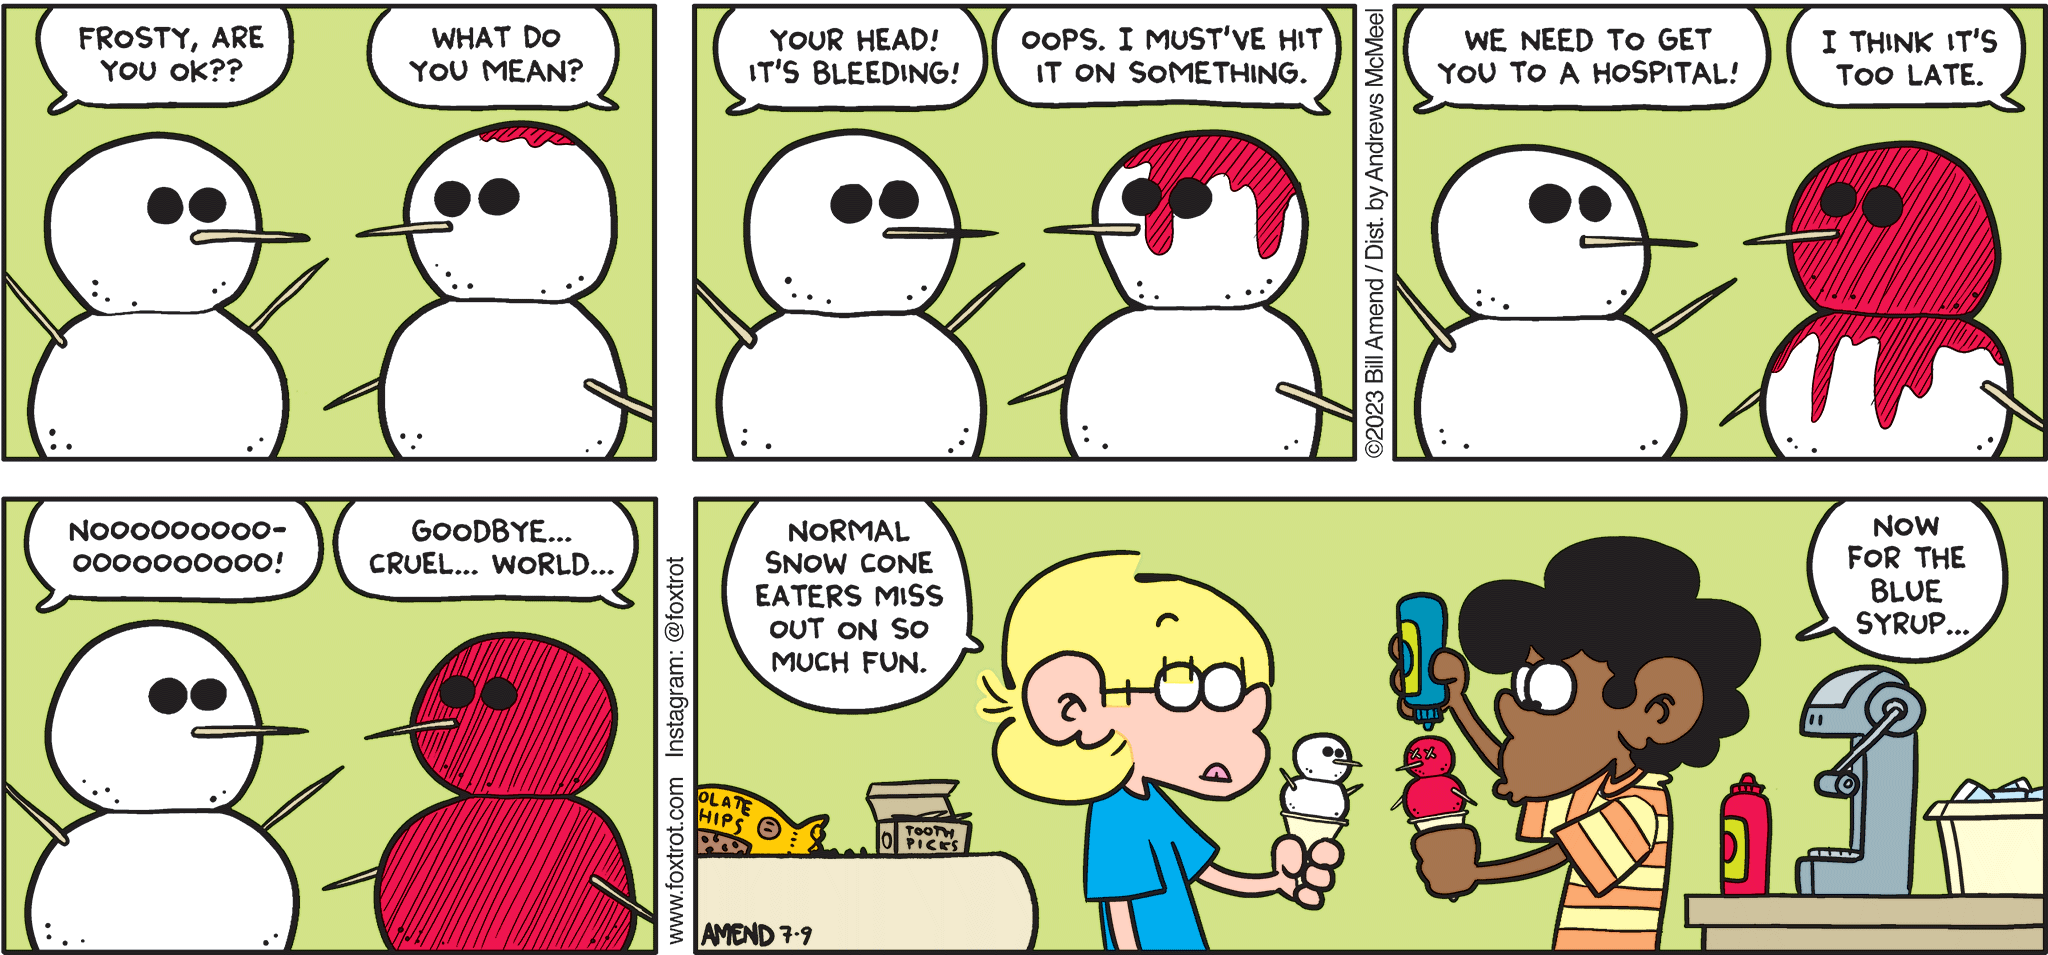 FoxTrot comic strip by Bill Amend - "Syrupy" published July 9, 2023 - Transcript: Jason: Frosty, are you ok? Marcus: What do you mean? Jason: Your head! It's bleeding! Marcus: Oops. I must've hit it on something. Jason: We need to get you to a hospital! Marcus: I think it's too late. Jason: Nooooooooooooooo! Marcus: Goodbye... Cruel... World... Jason: Normal snow cone eaters miss out on so much fun. Marcus: Now for the blue syrup. 